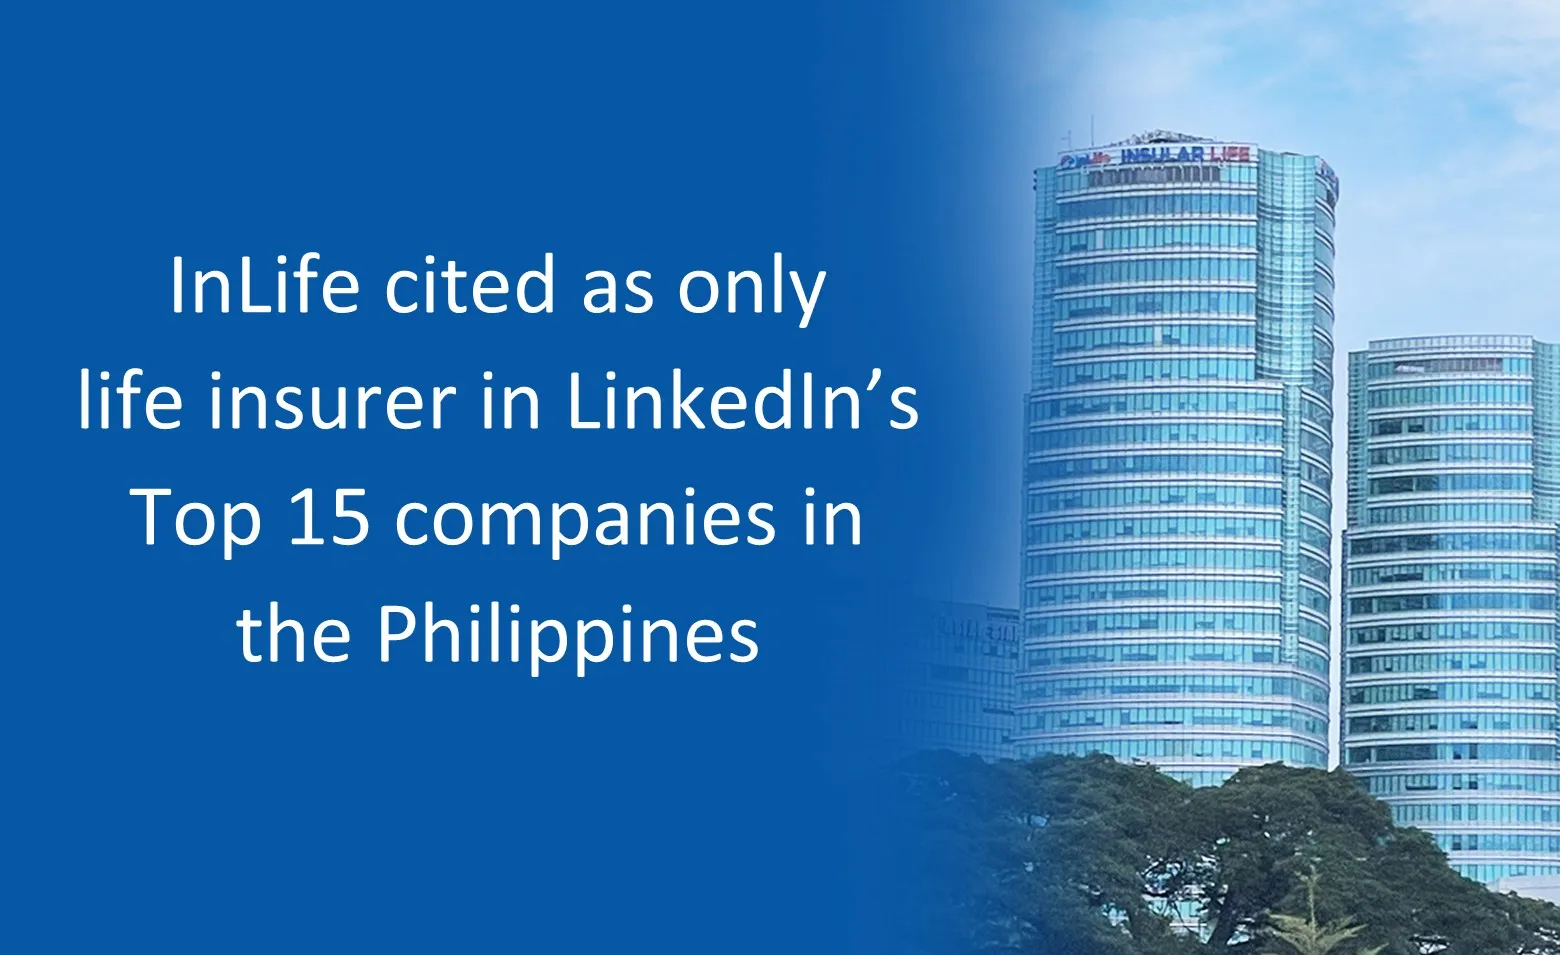 inlife-cited-as-only-life-insurer-in-linkedin-s-top-15-companies-in-the-philippines